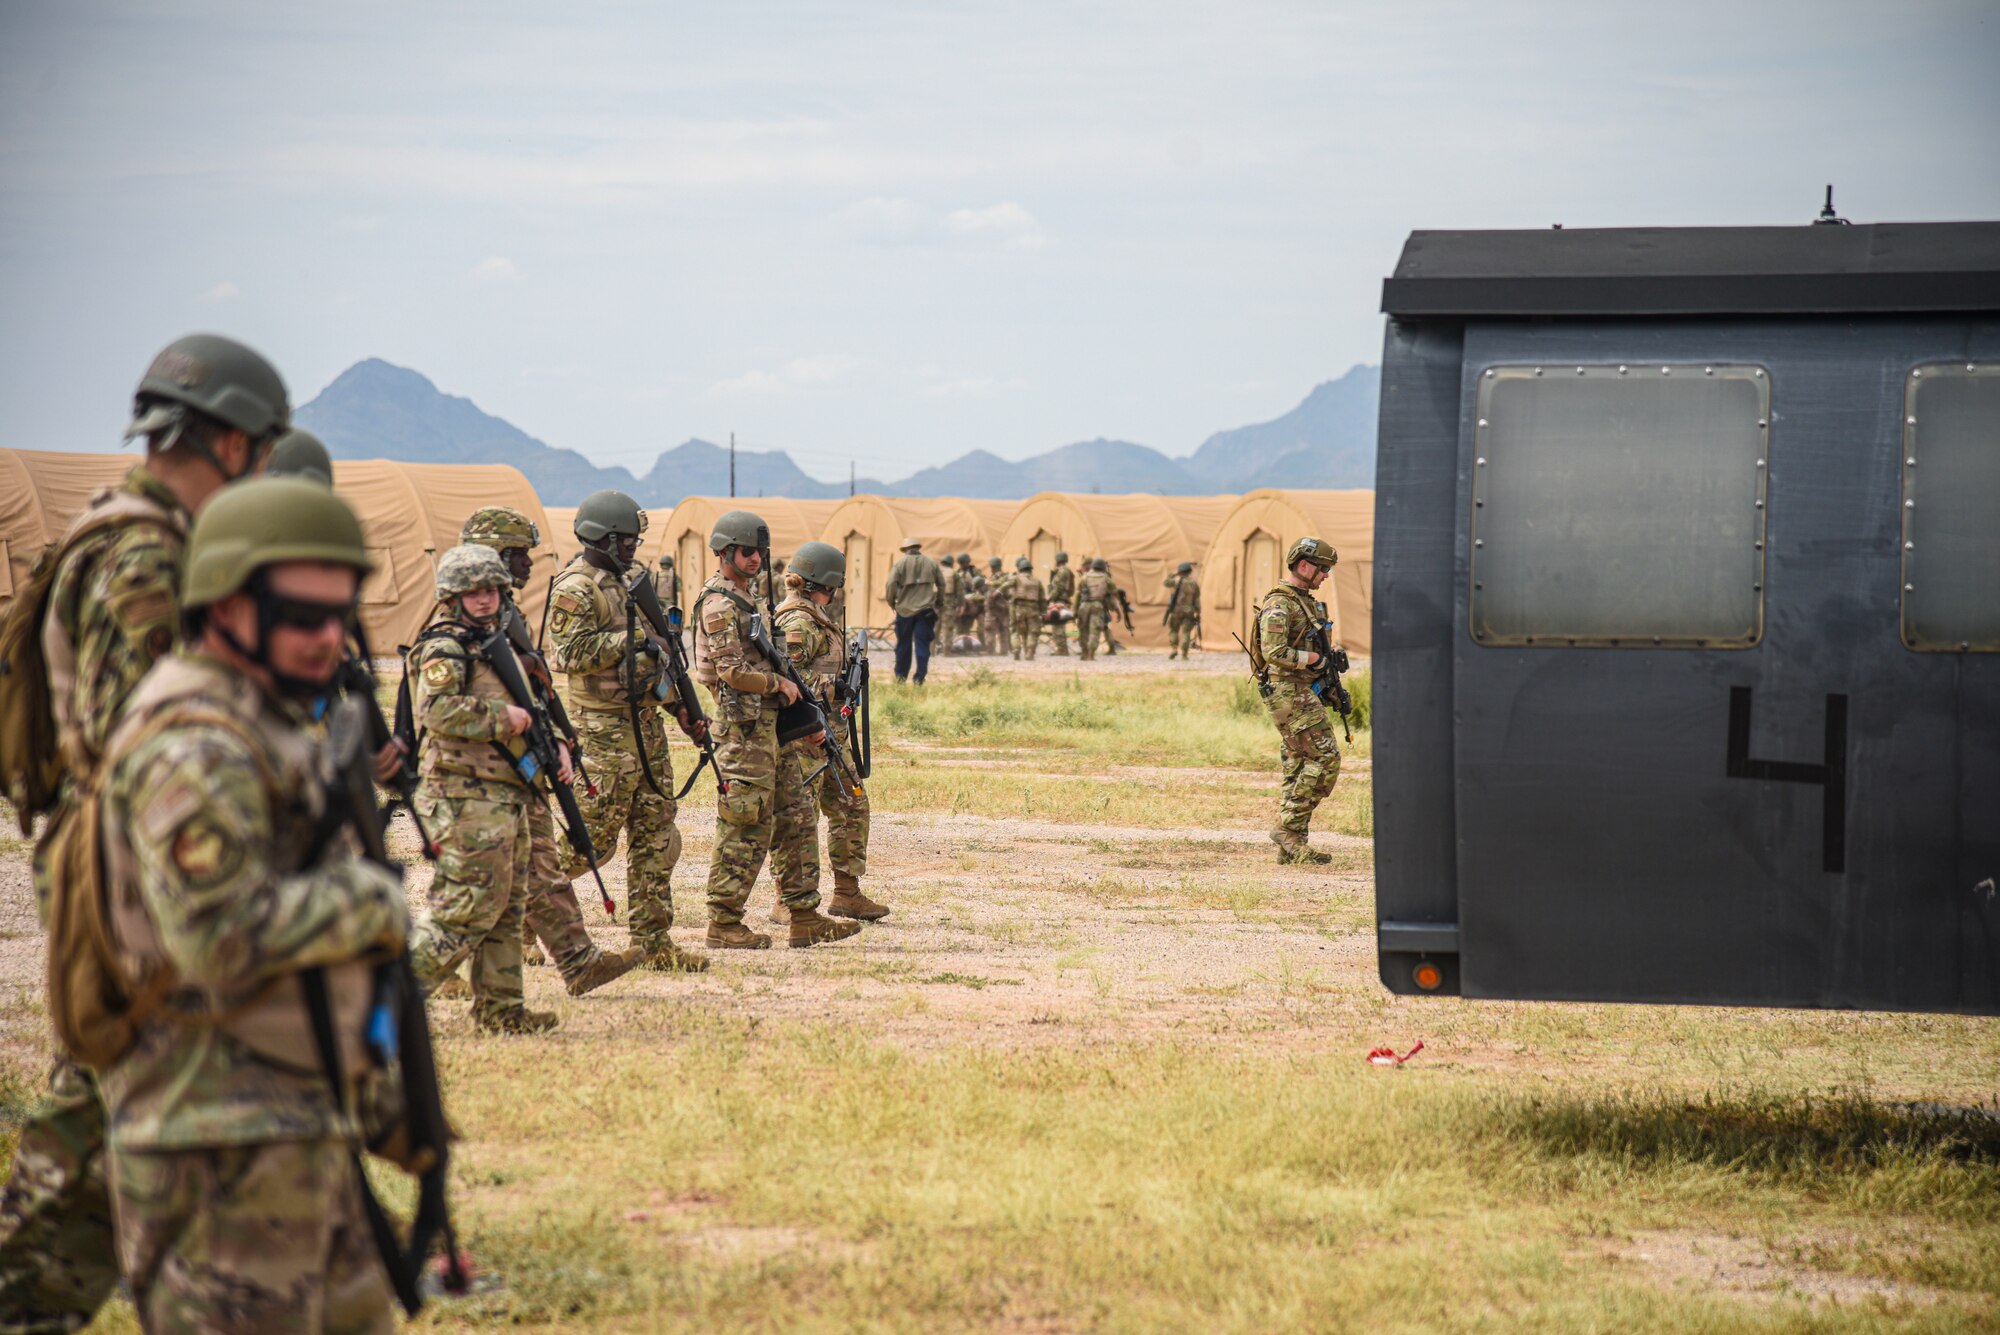 Pictured above is a large group of Airmen walking side-by-side in a line in a field.